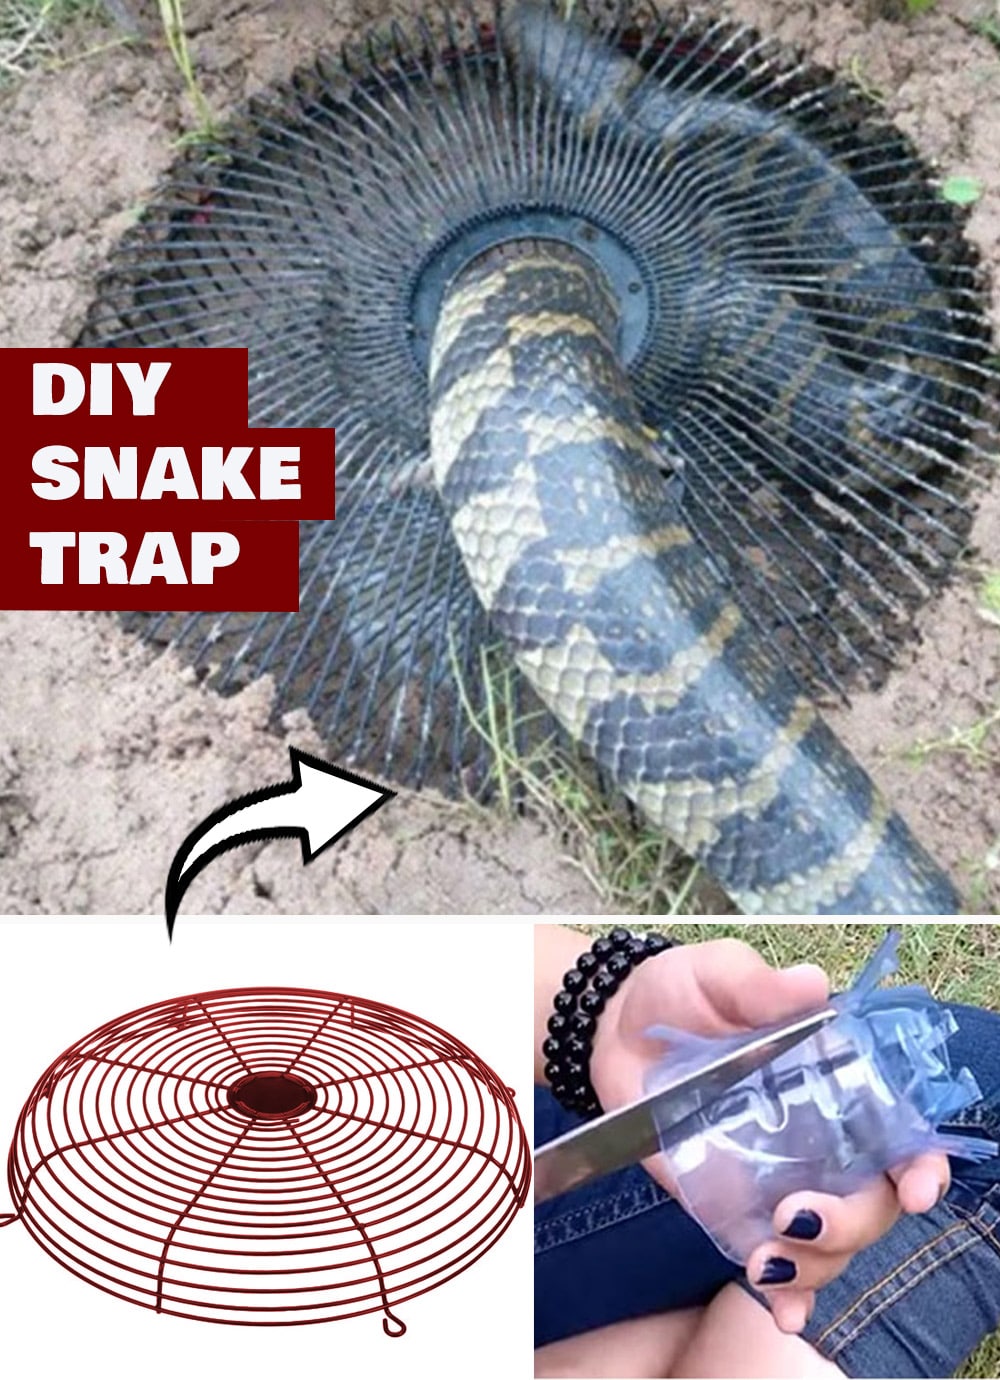 DIY Snake Trap - How to Get Rid of Backyard Snakes